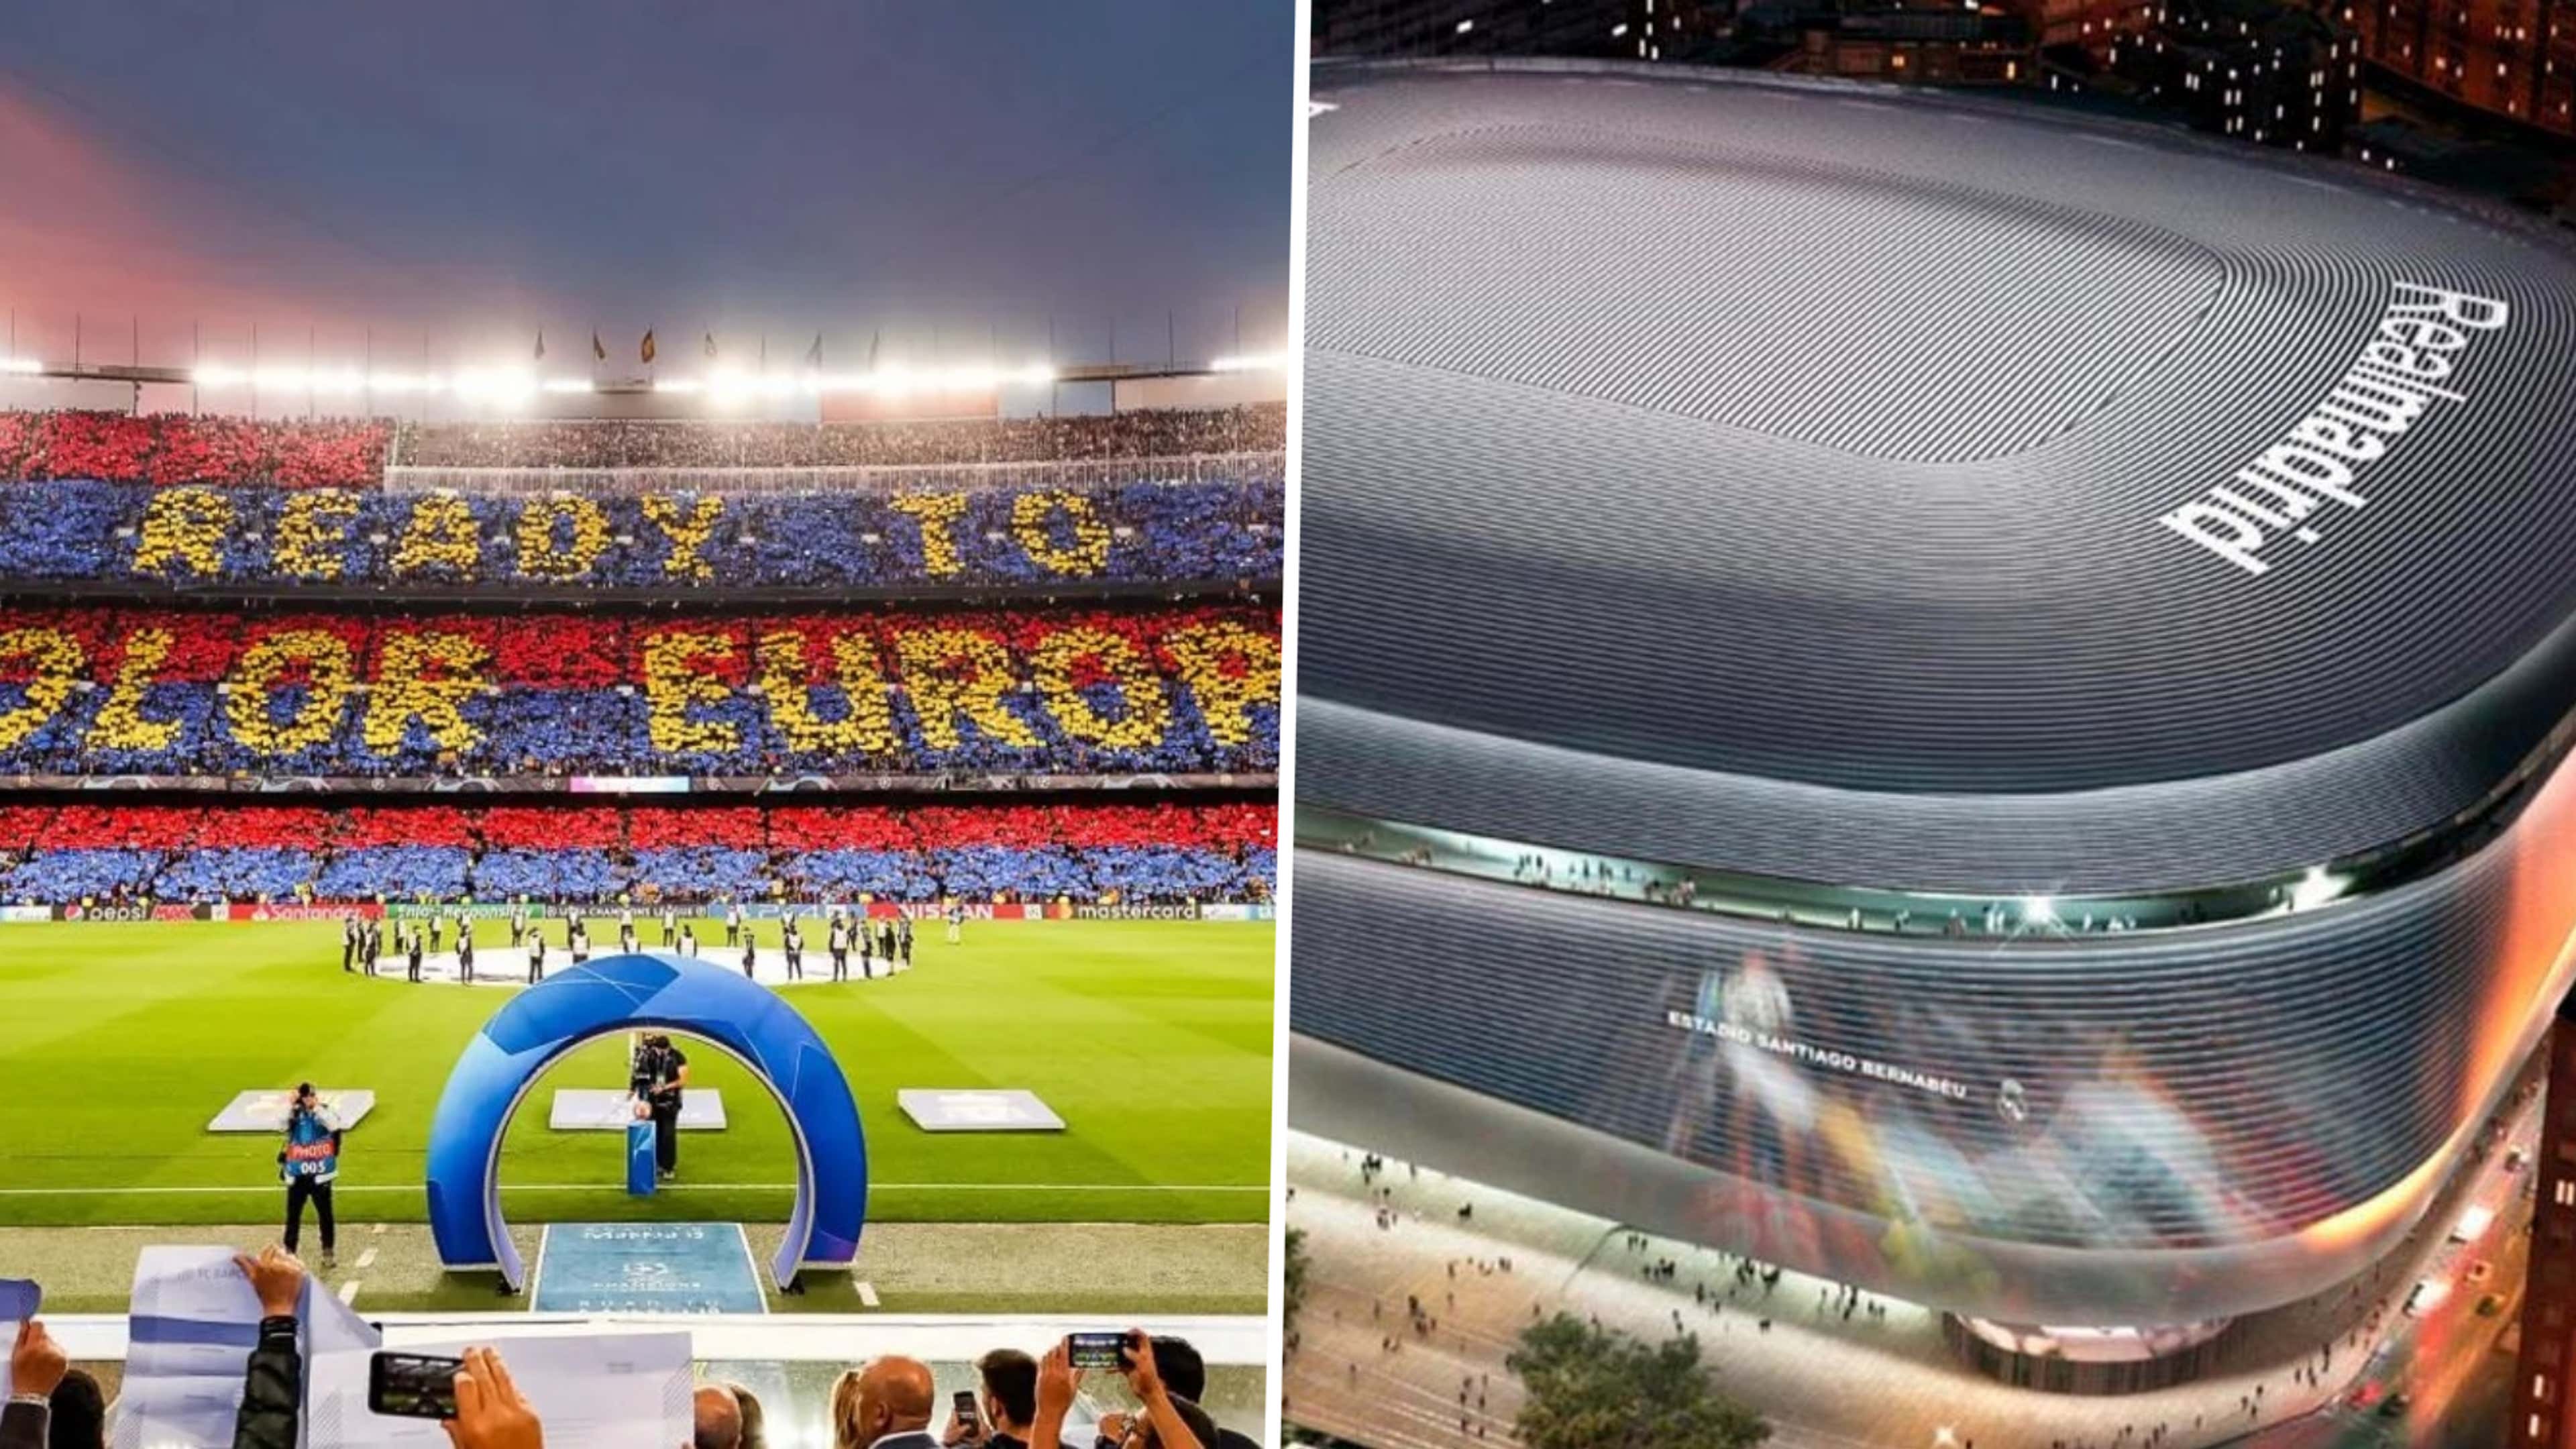 Barcelona expects full capacity at Camp Nou for 'El Clasico